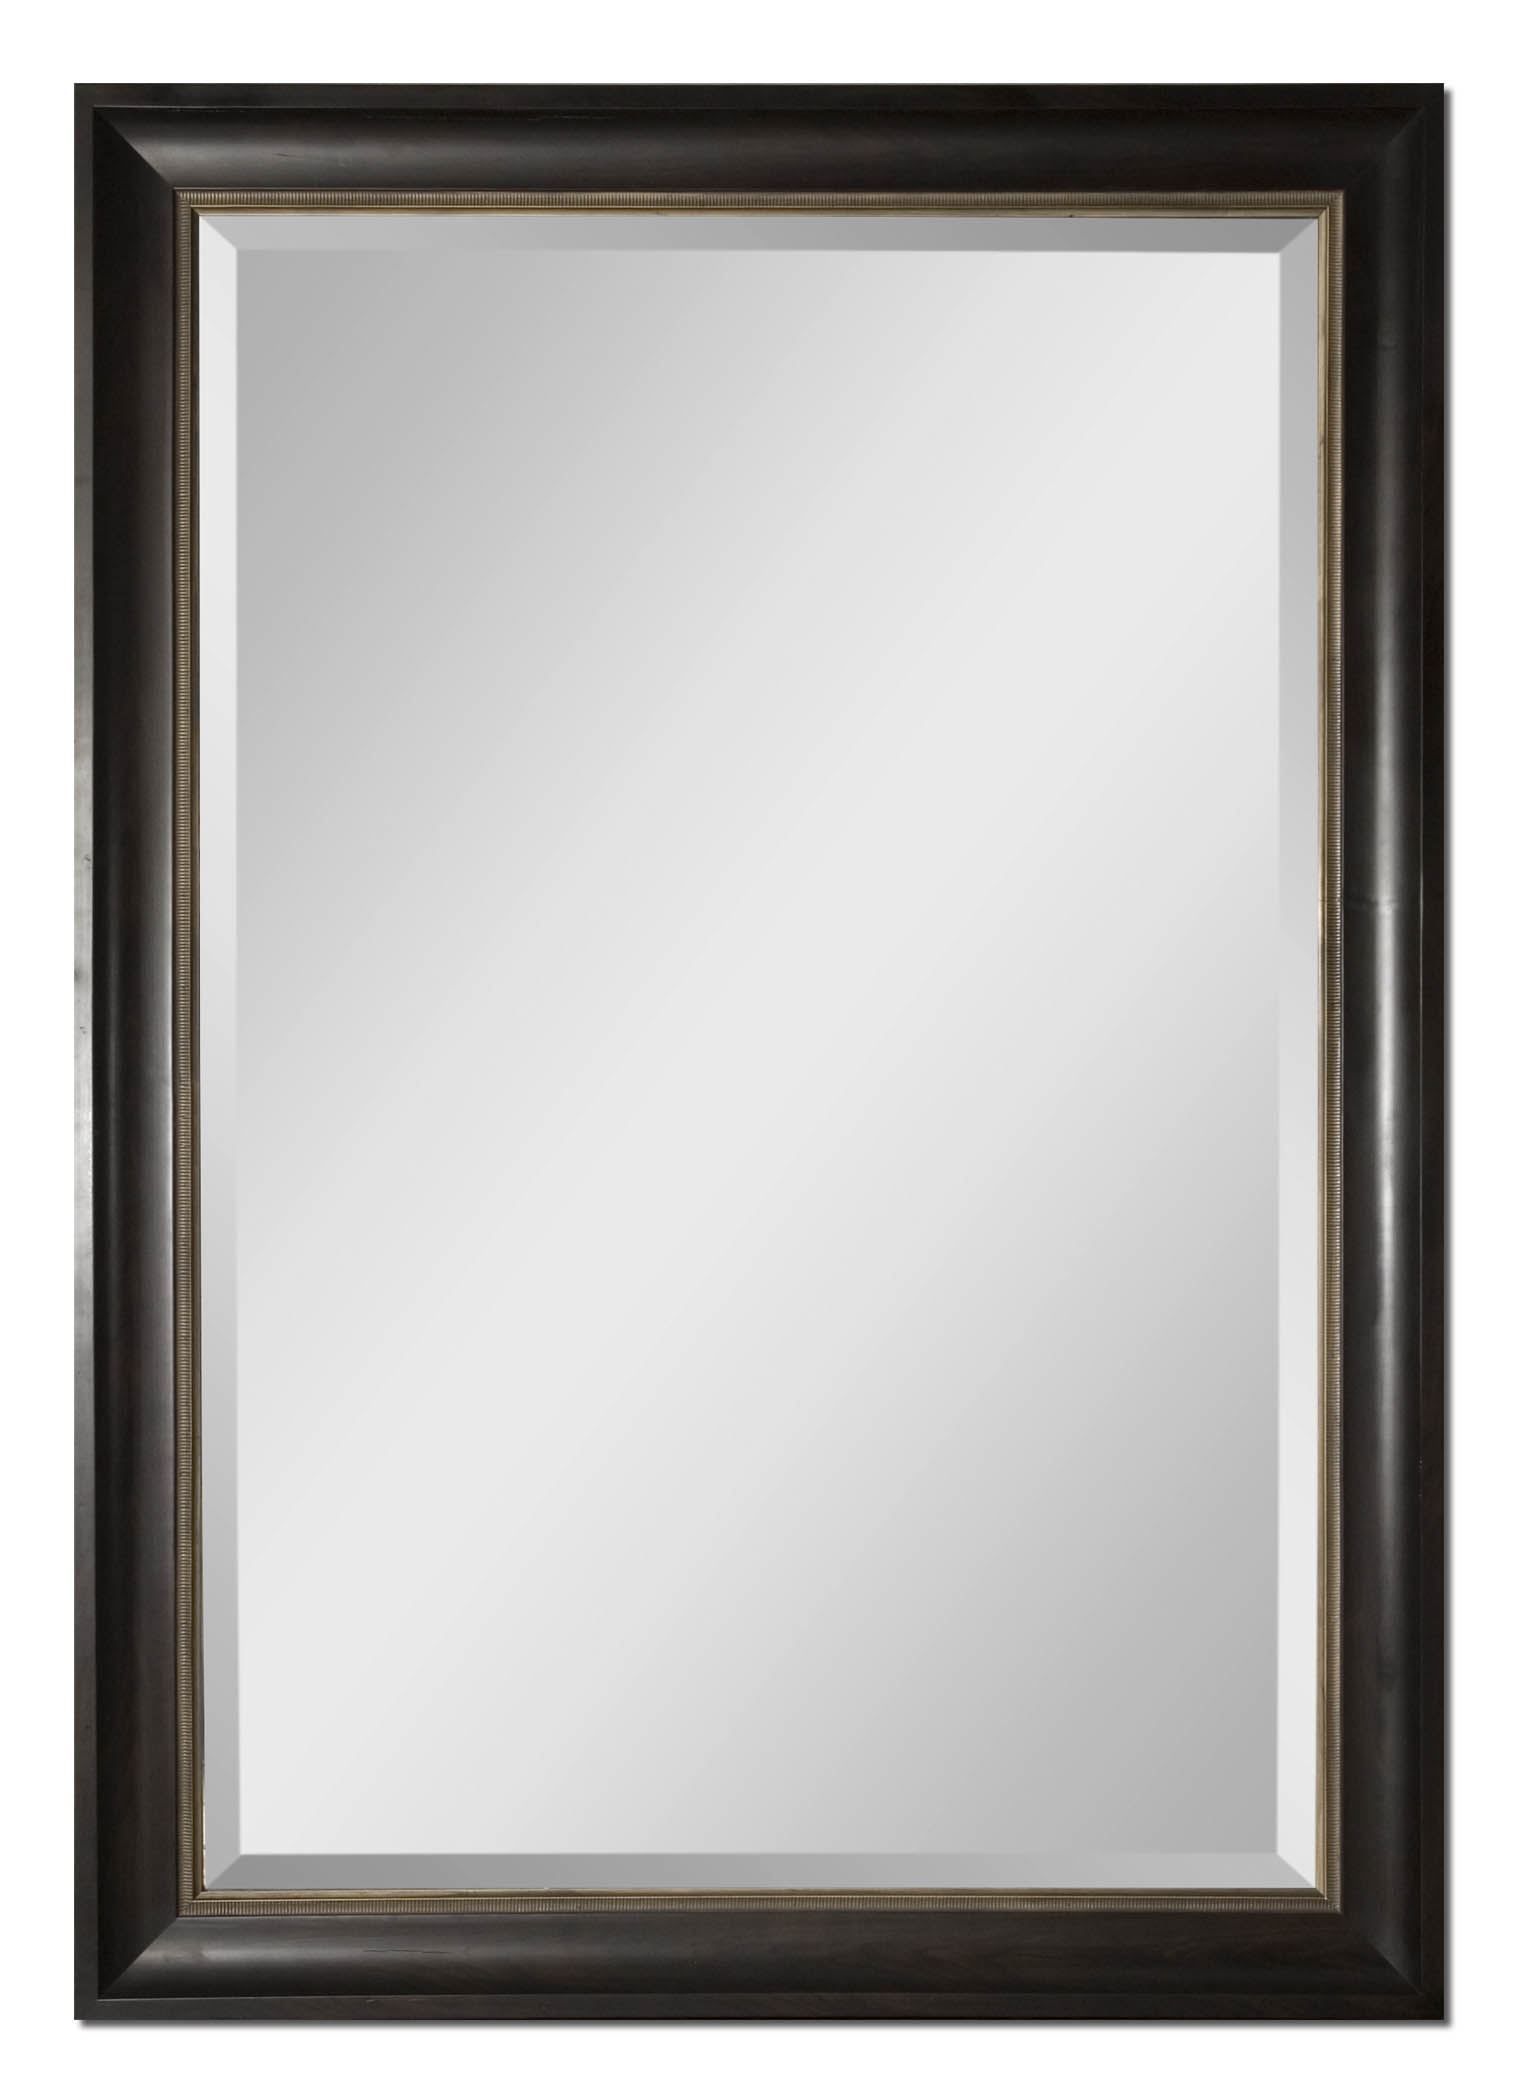 Axton Oversized Black Framed Mirroruttermost | Black Mirror Frame Within Matte Black Square Wall Mirrors (View 8 of 15)